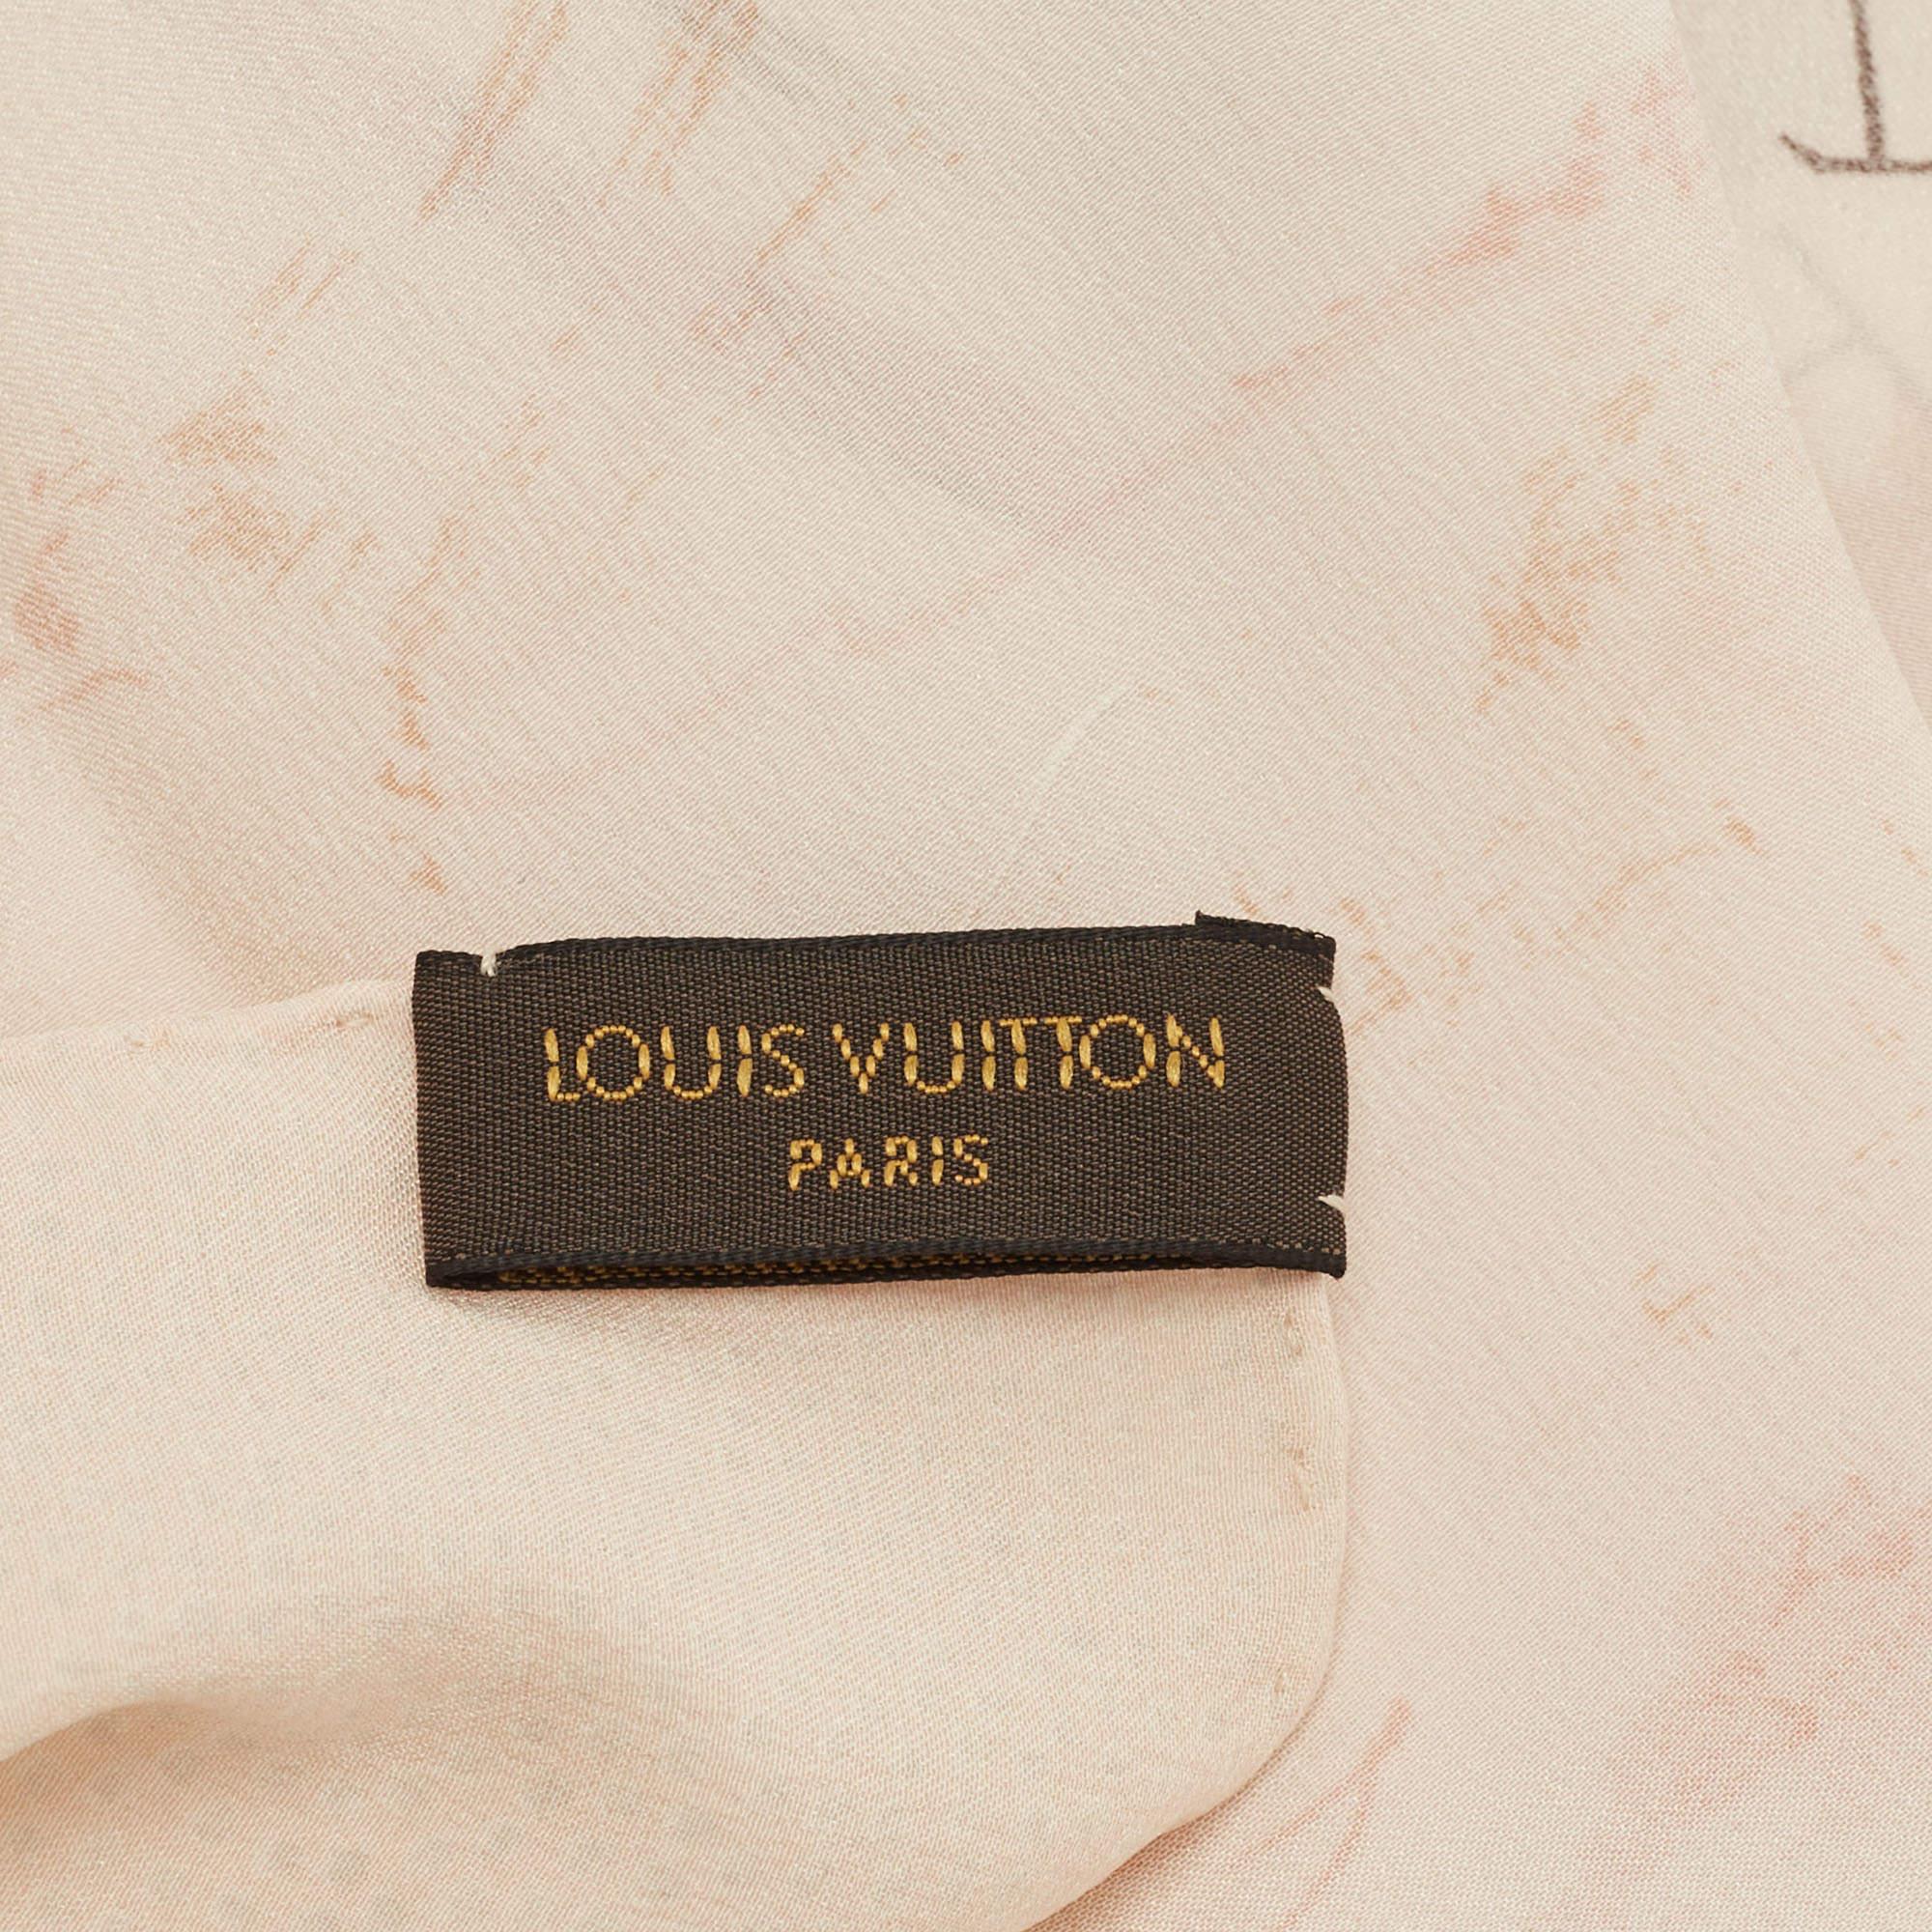 Whether it is over an evening outfit or chic casual, Louis Vuitton ensures an extra element of style with this gorgeous scarf. Made of silk, the creation's appeal is brought out with prints all over.

